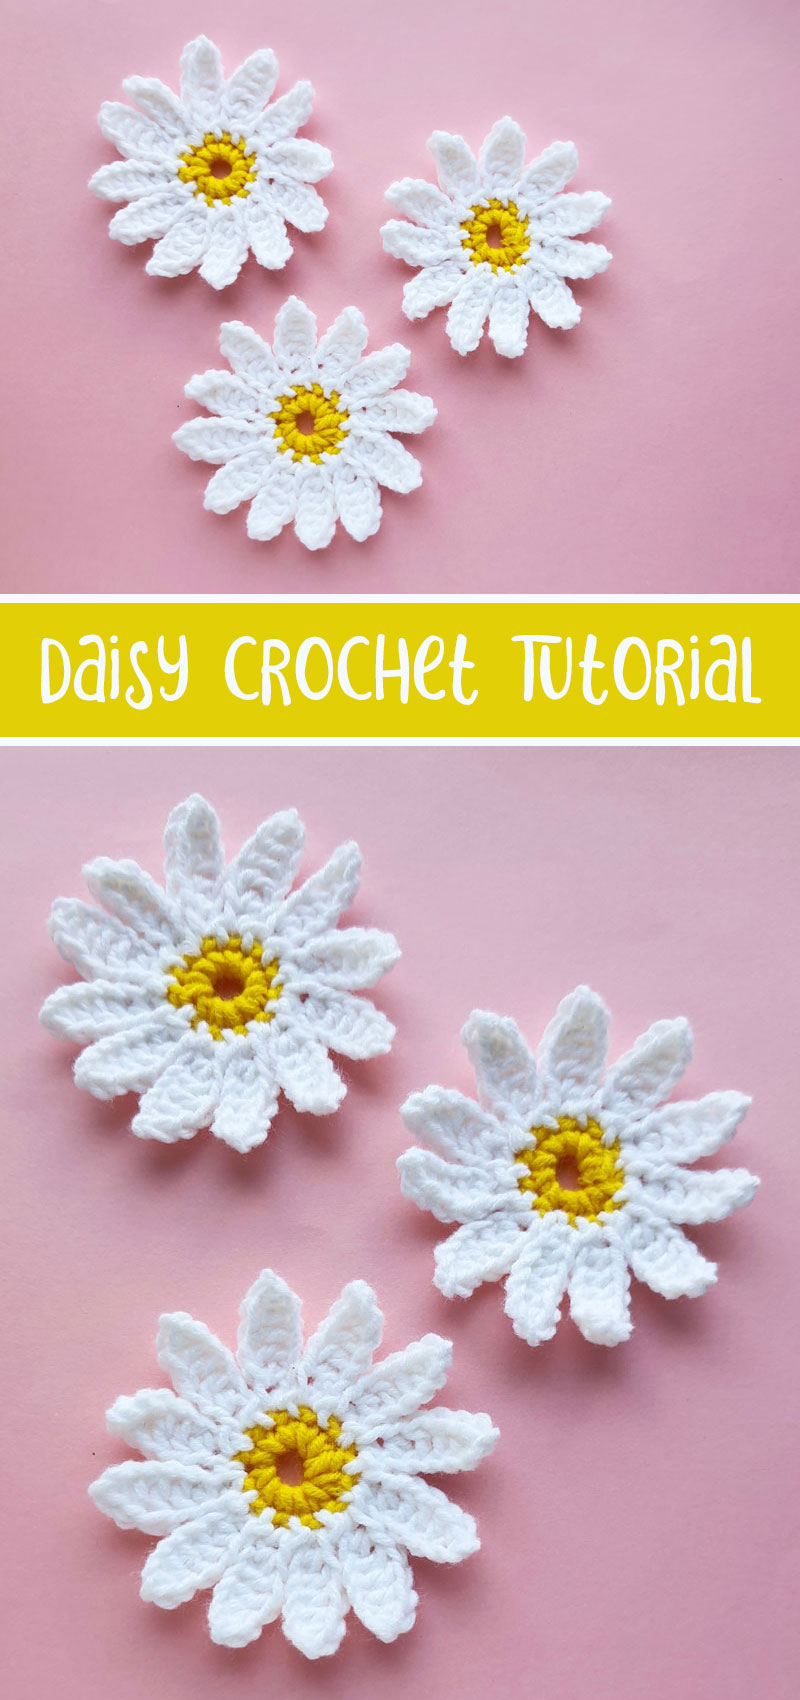 Free daisy crochet pattern cover collage